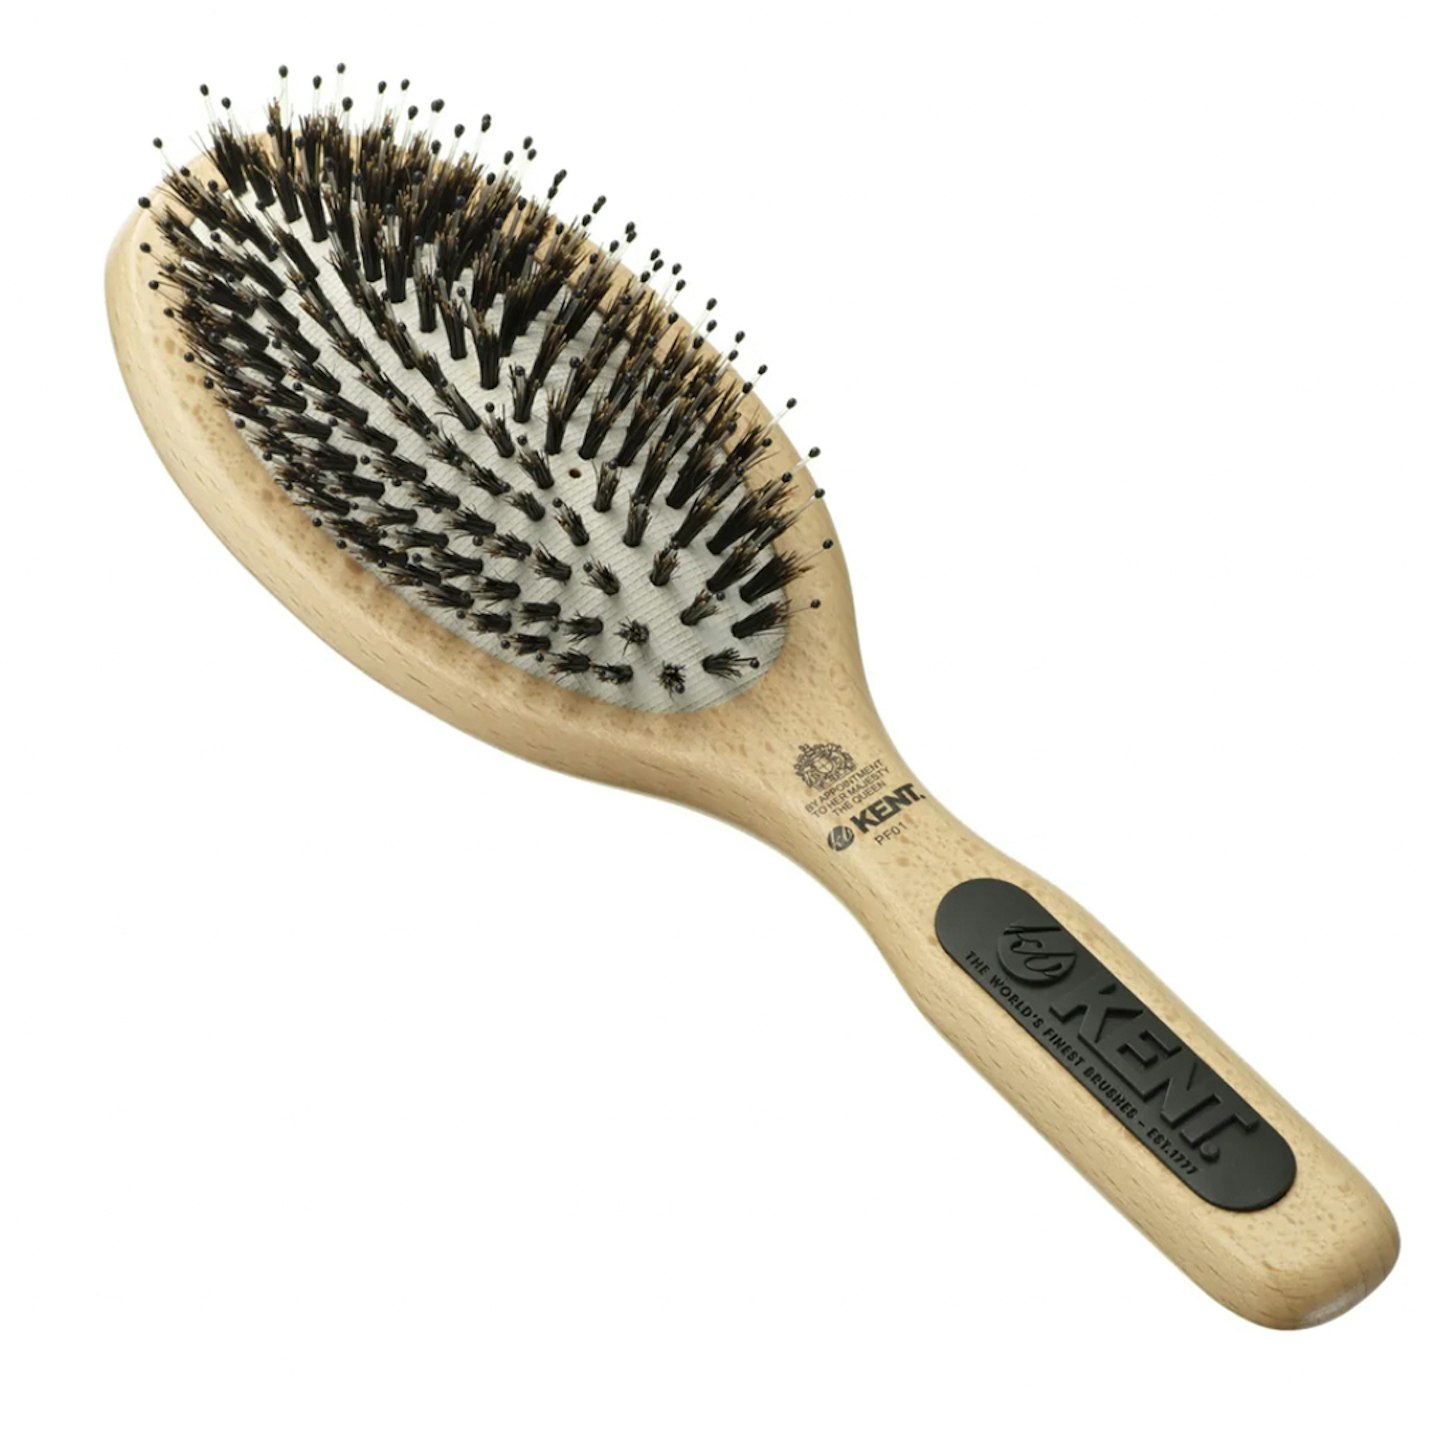 Best hair brushes - Kent perfect for smoothing brush